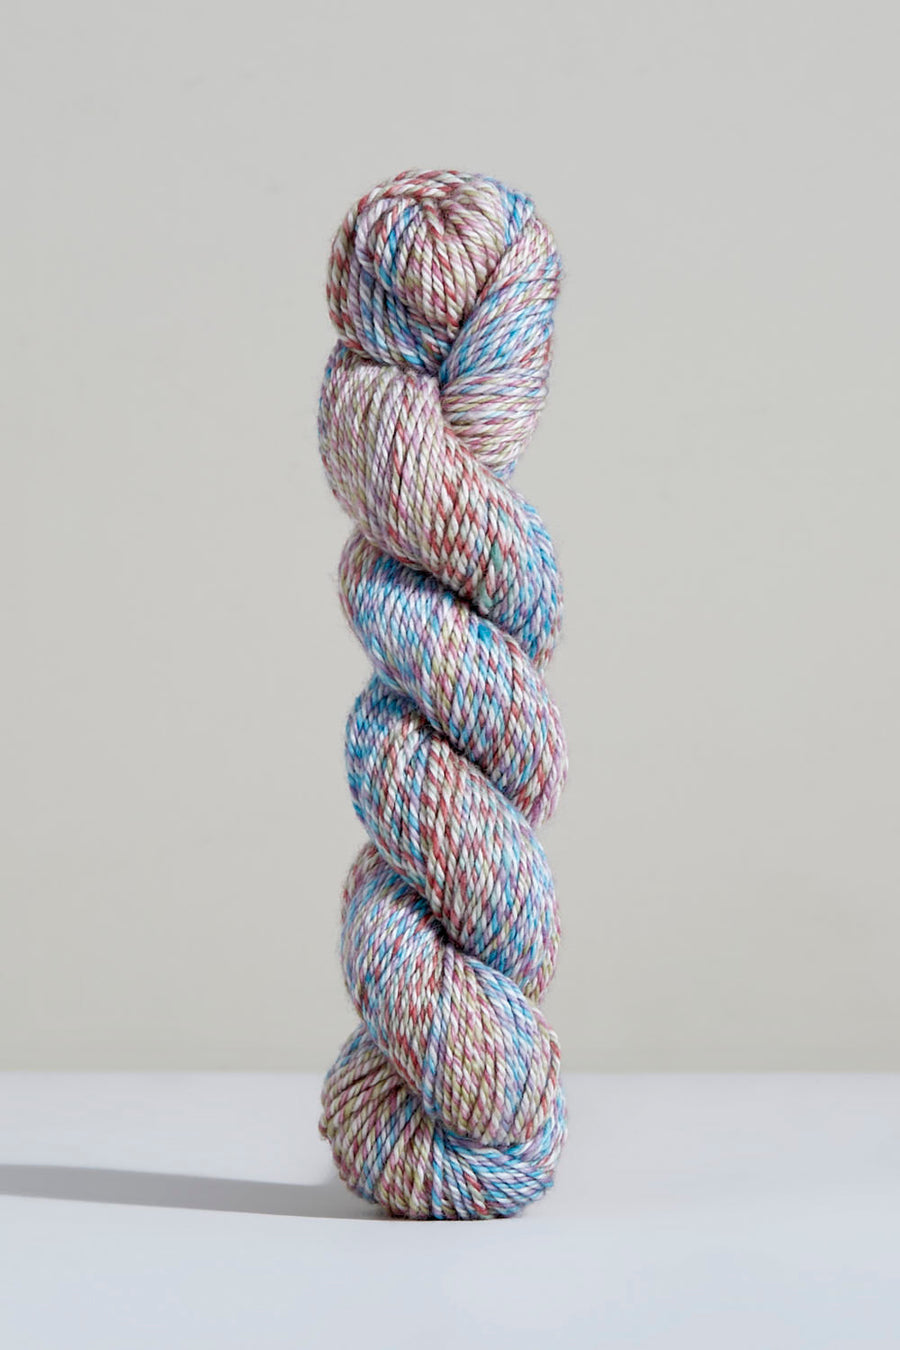 Spiral Grain Light Worsted | Weeping Willow